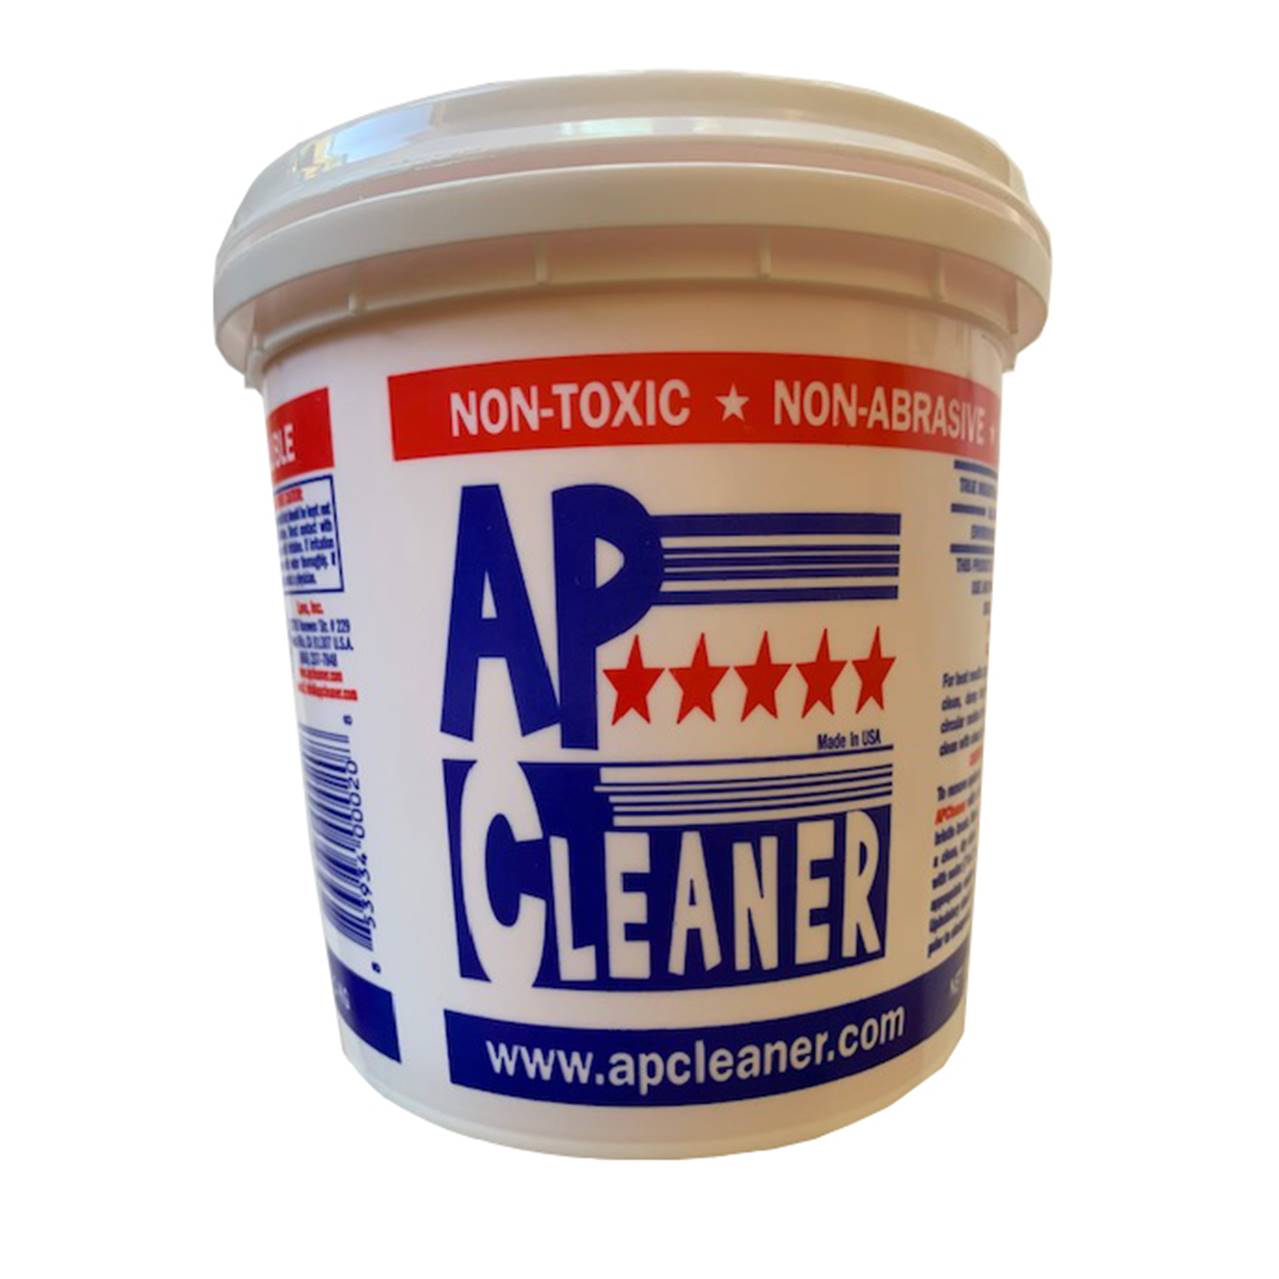 APCleaner 36 Oz. True Industrial Strength Non-Toxic Concentrated All Purpose Cleaner, Environmentally Safe and Gentle